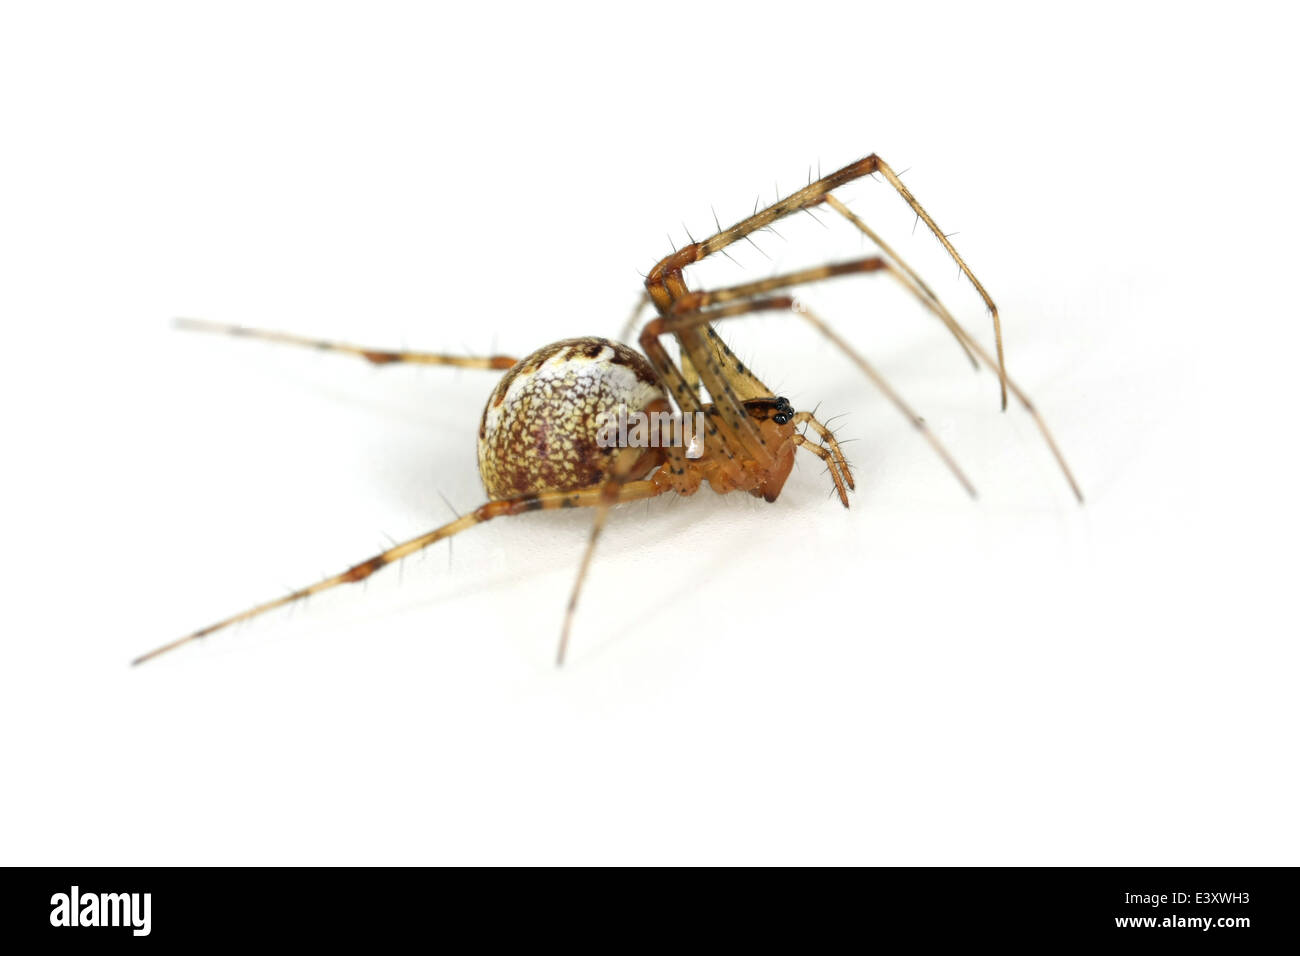 Female Pine-tree embroiderer (Pityohyphantes phrygianus) spider, part of the family Linyphiidae - Sheetweb weavers. Stock Photo